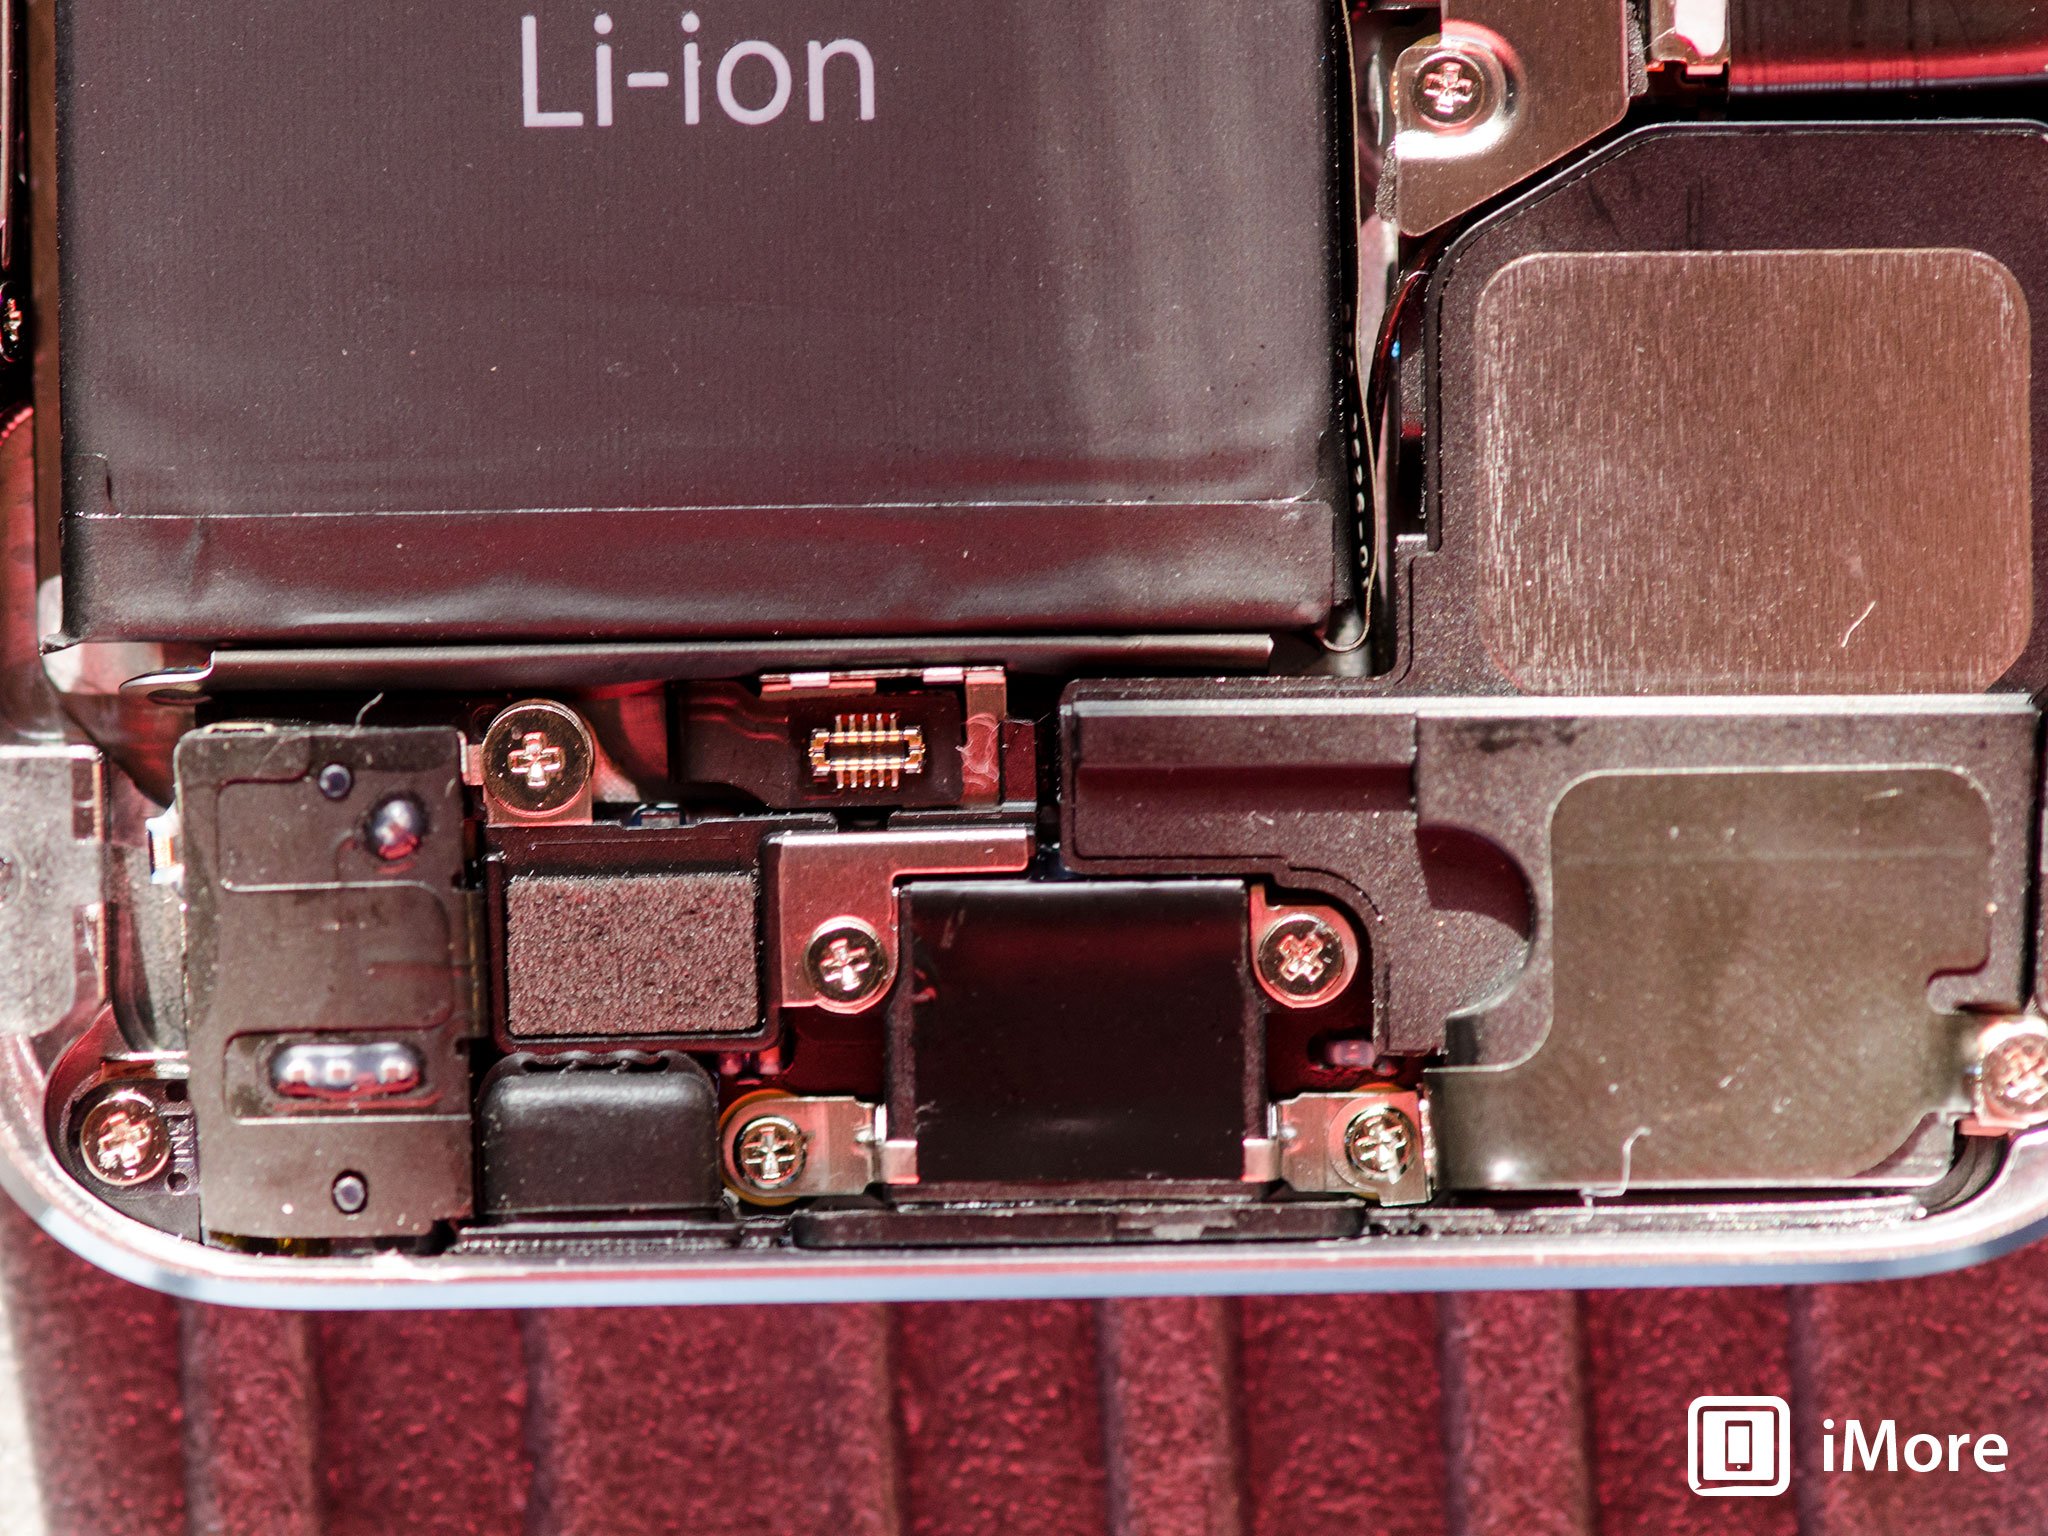 A proper look at the dock and headphone jack assembly in the iPhone 5s